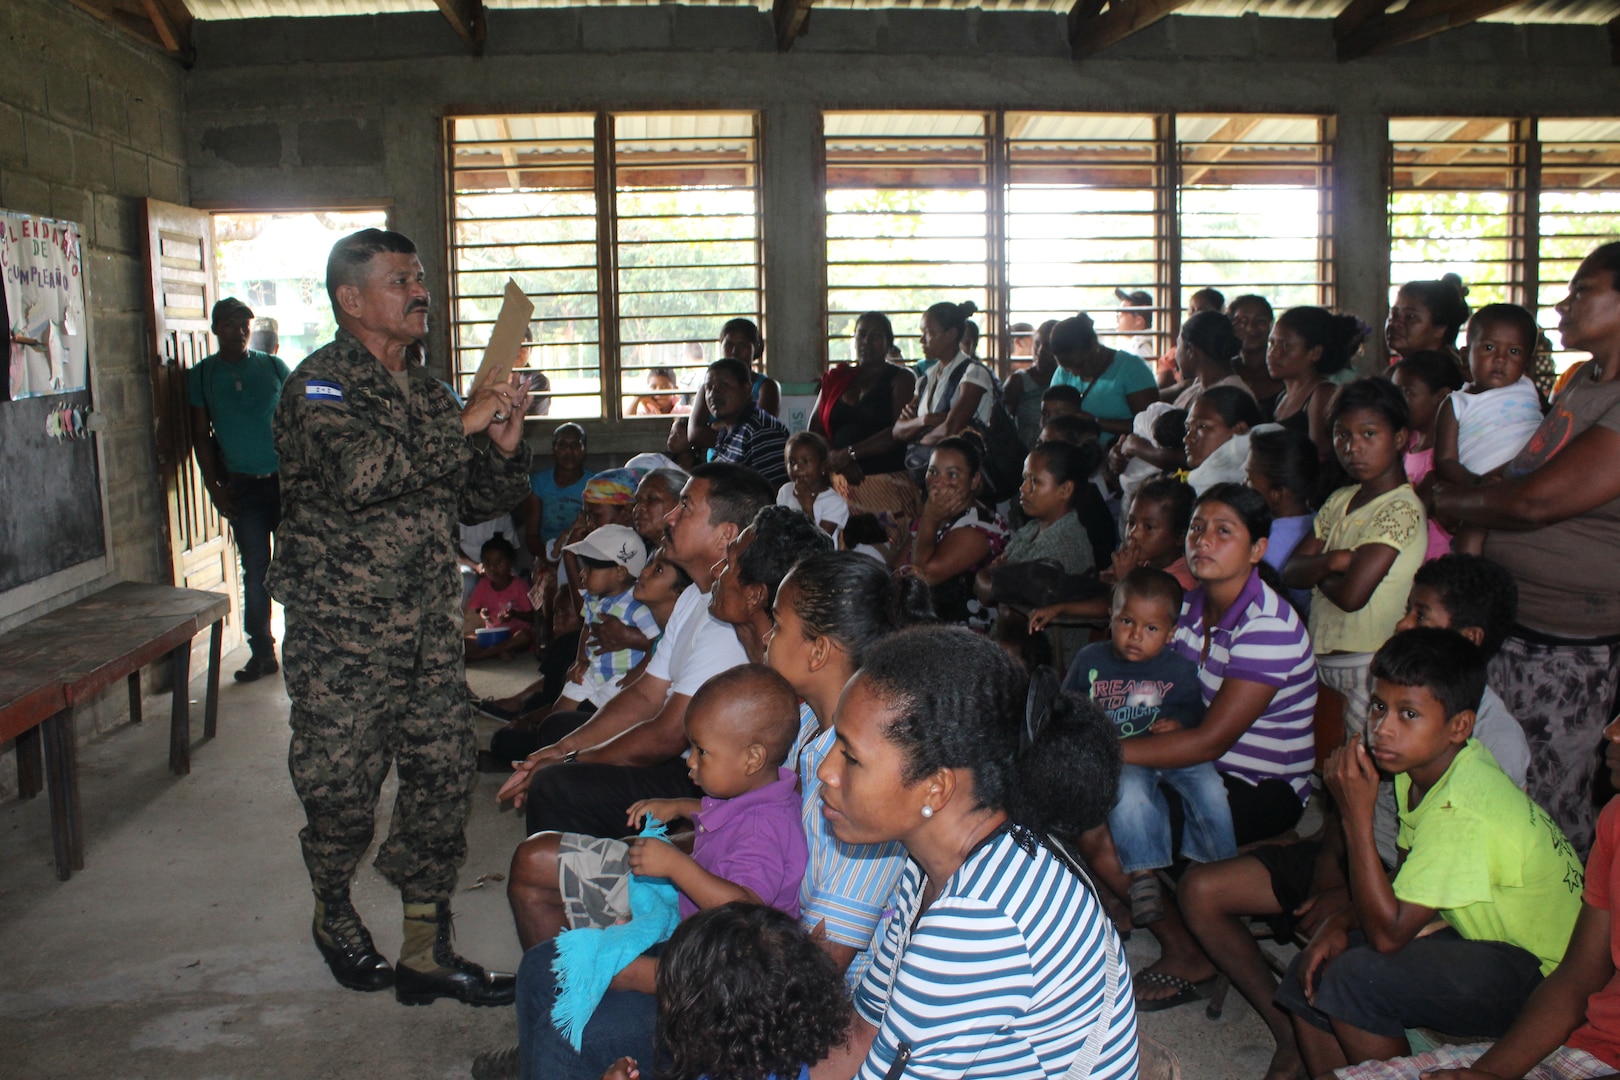 Sgt. Luis Alons211099o Aleman, with the Honduran Army  6th Infantry Battalion, gives patients a preventive health class before visiting the medical care providers during a Medical Readiness Training Exercise in Nueva Jerusalén, Gracias a Dios Department, Honduras, Jan. 28, 2016. This class is intended to help prevent many of the common illnesses in the area, which can be prevented through basic hygiene measures. (U.S. Army photo by Maria Pinel/Released)